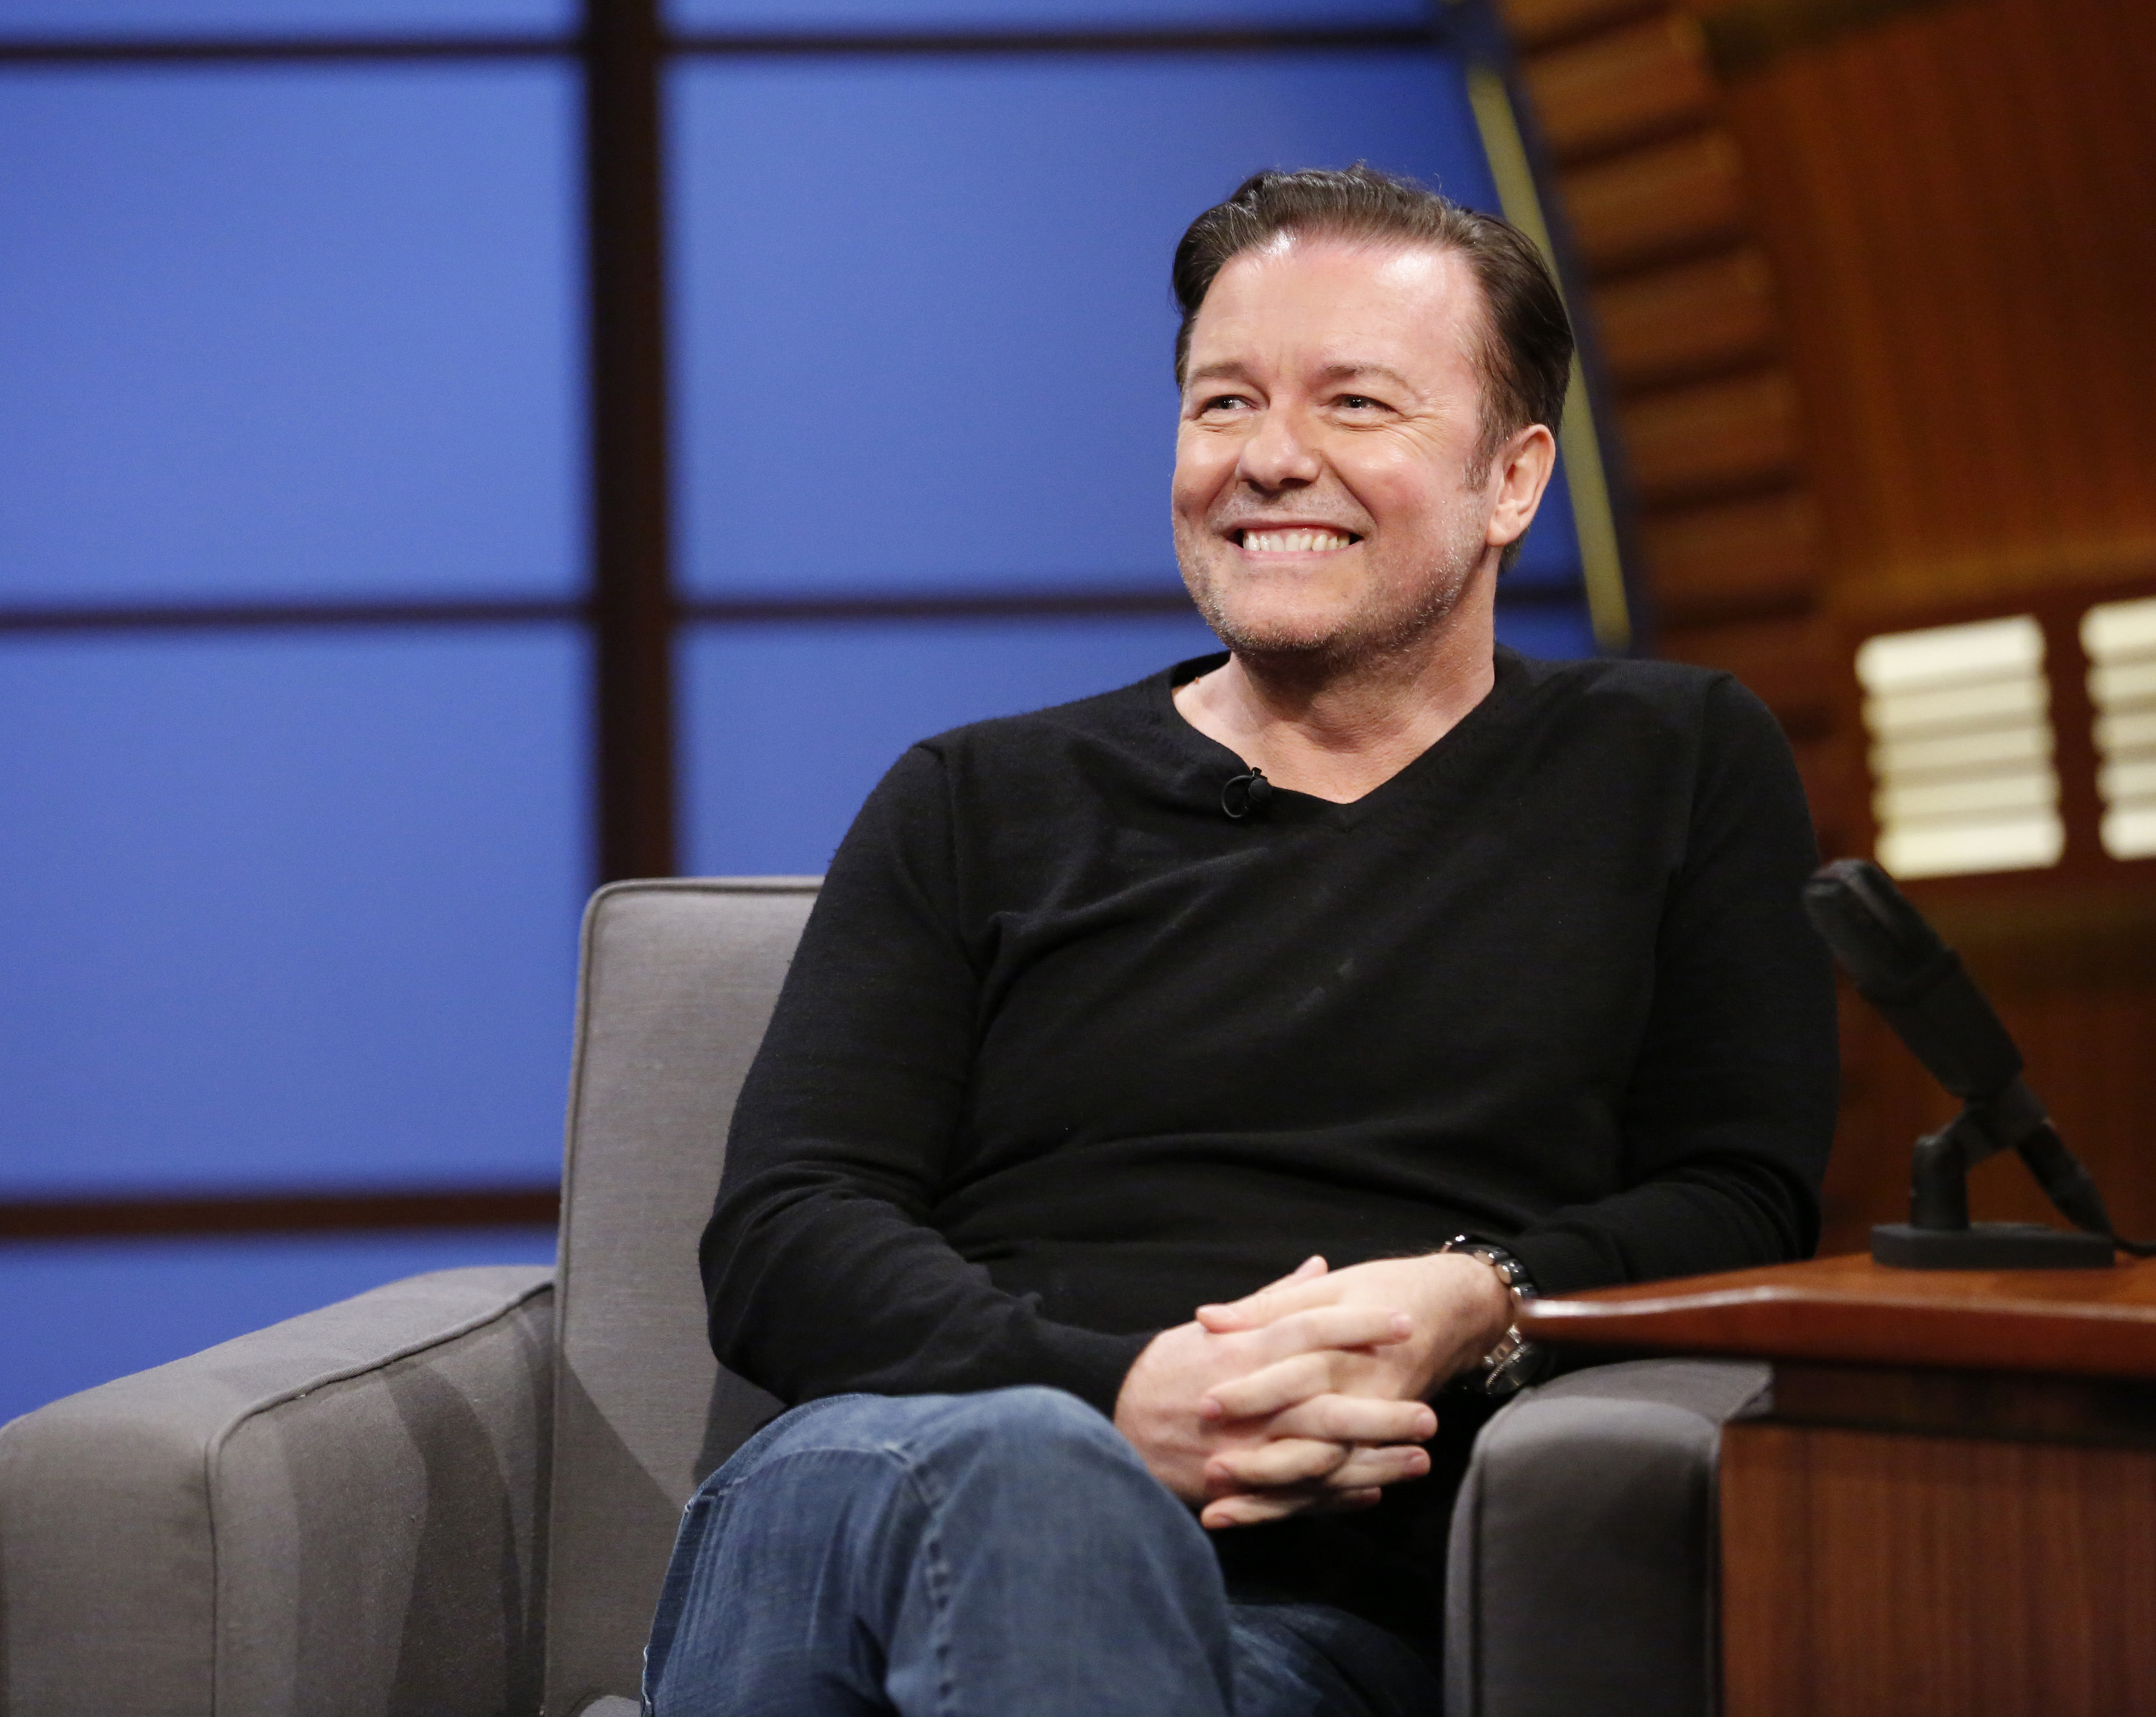 Comedian Ricky Gervais during an interview on July 24, 2014 (NBC--NBCU Photo Bank via Getty Images)